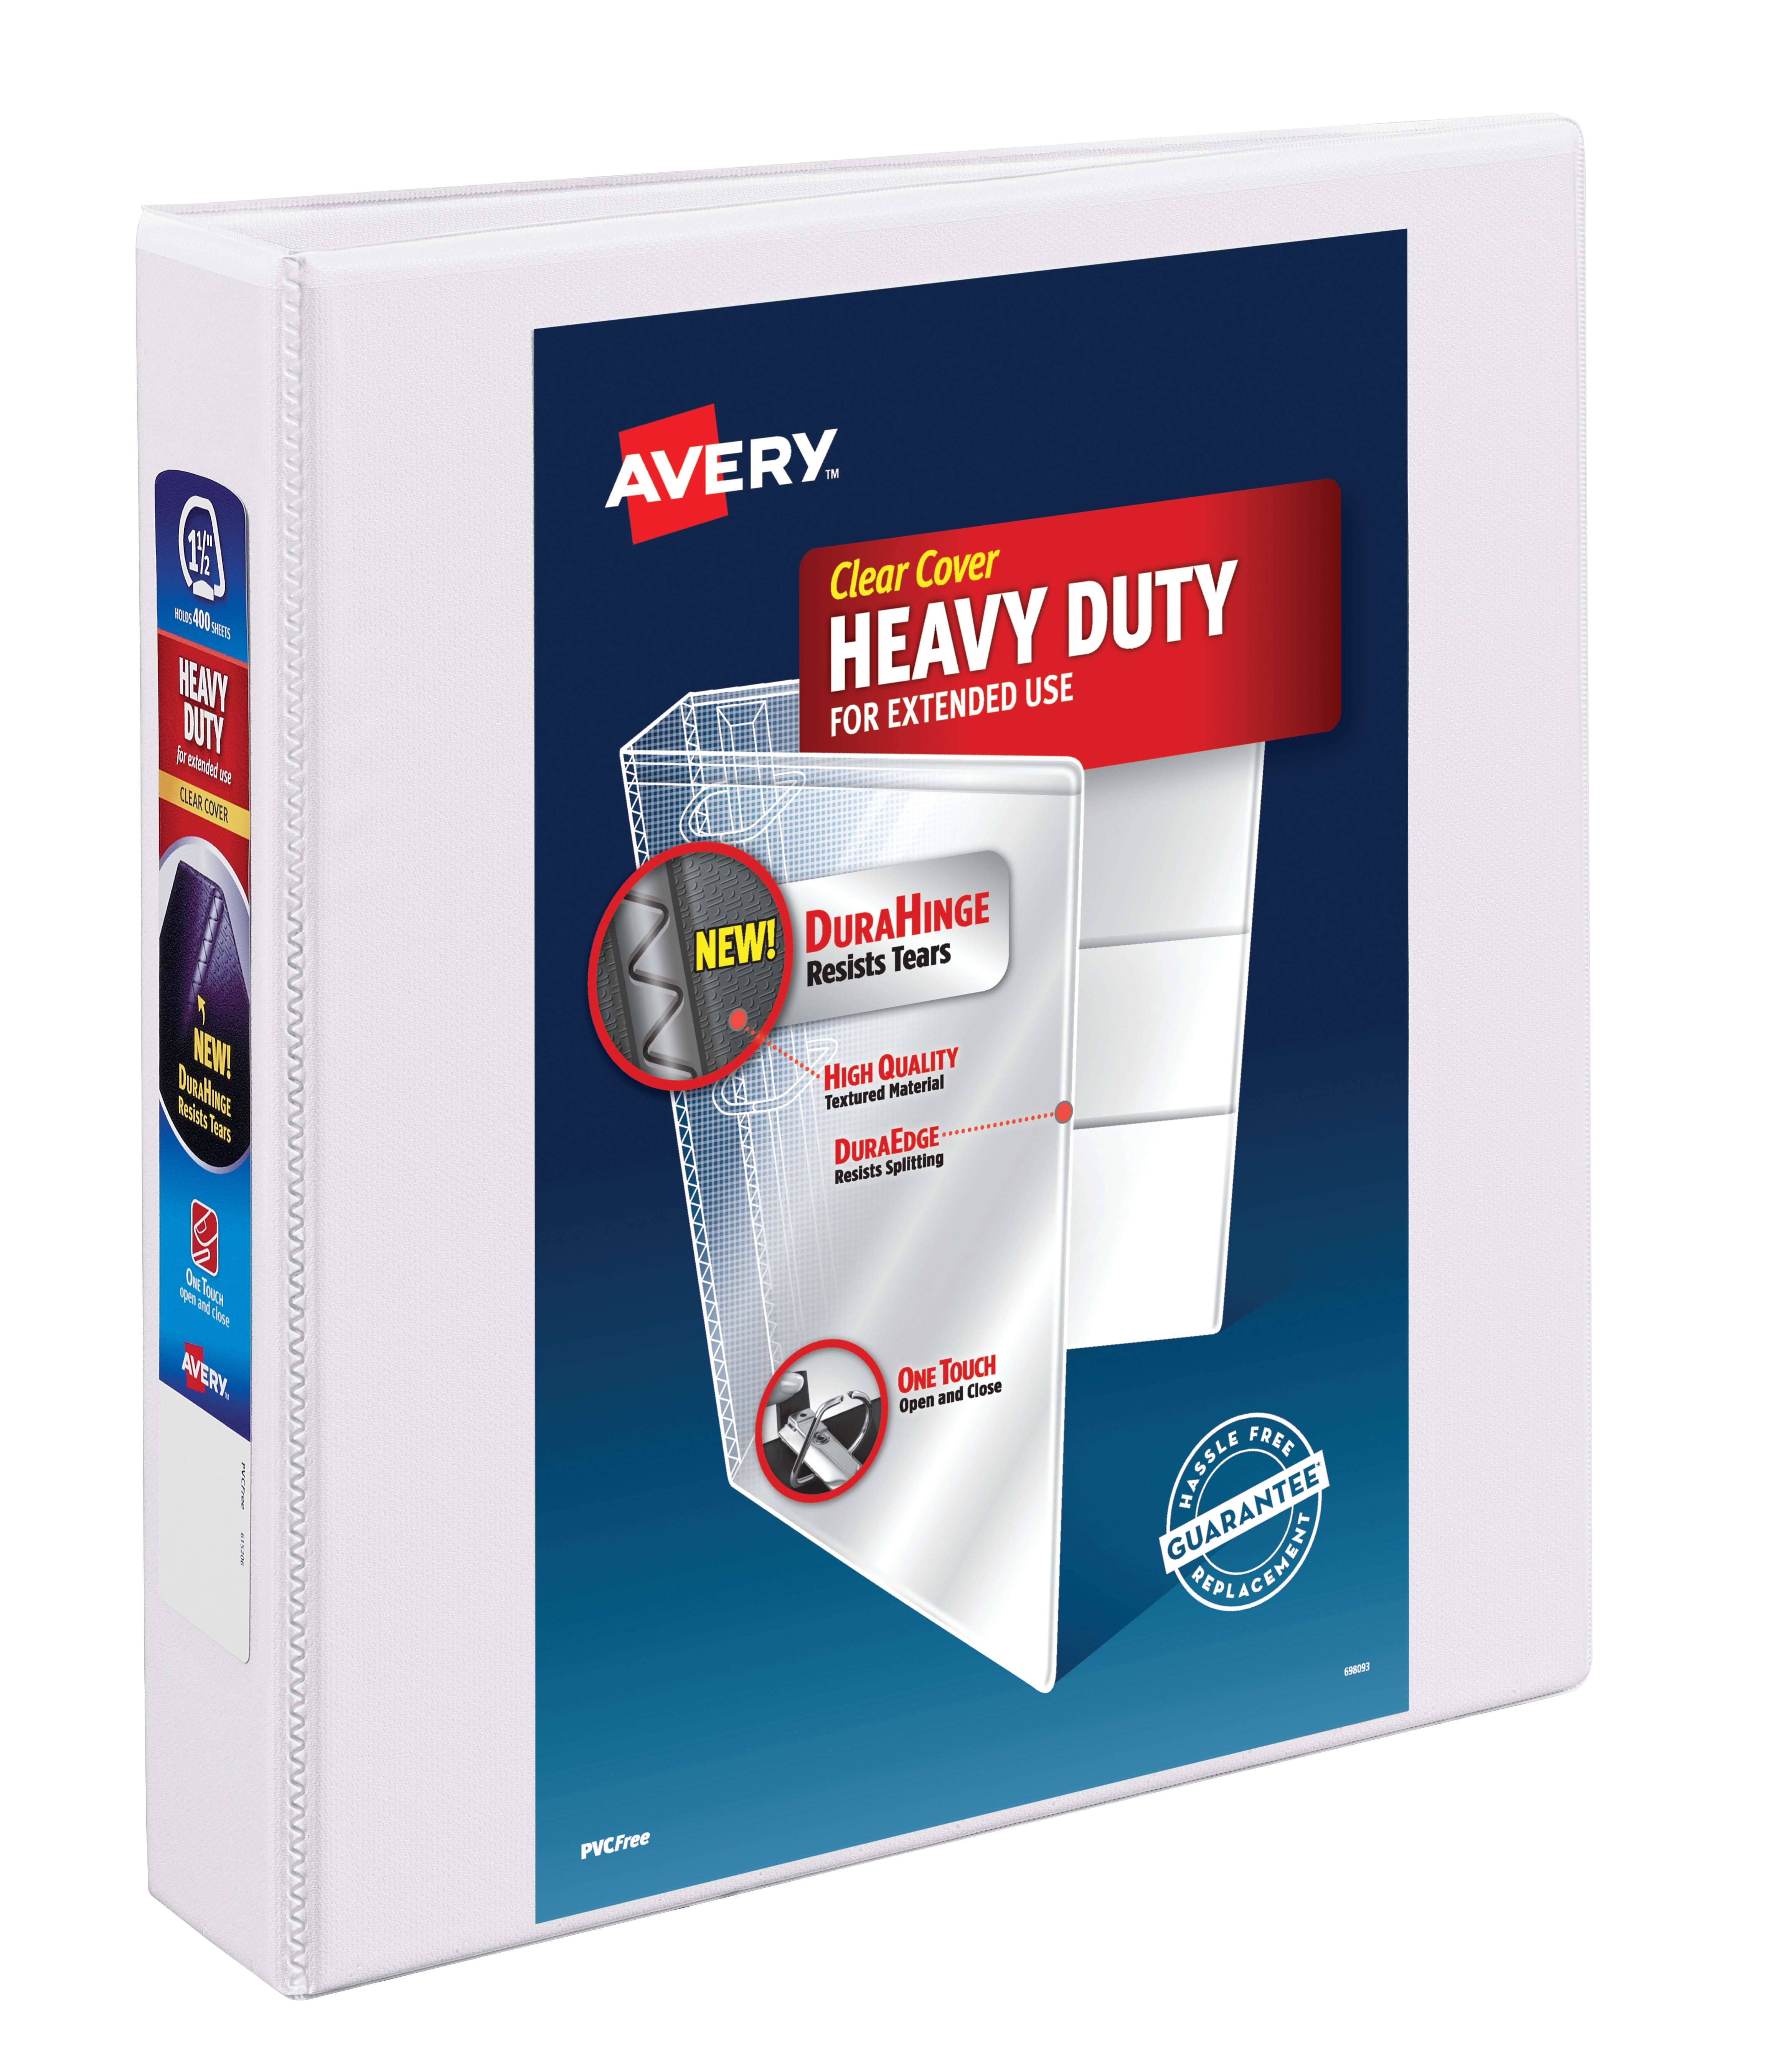 Avery Heavy Duty View Binder, White, 1.5-Inch, Slant Ring, One-Touch, 375 Sheets (79308)